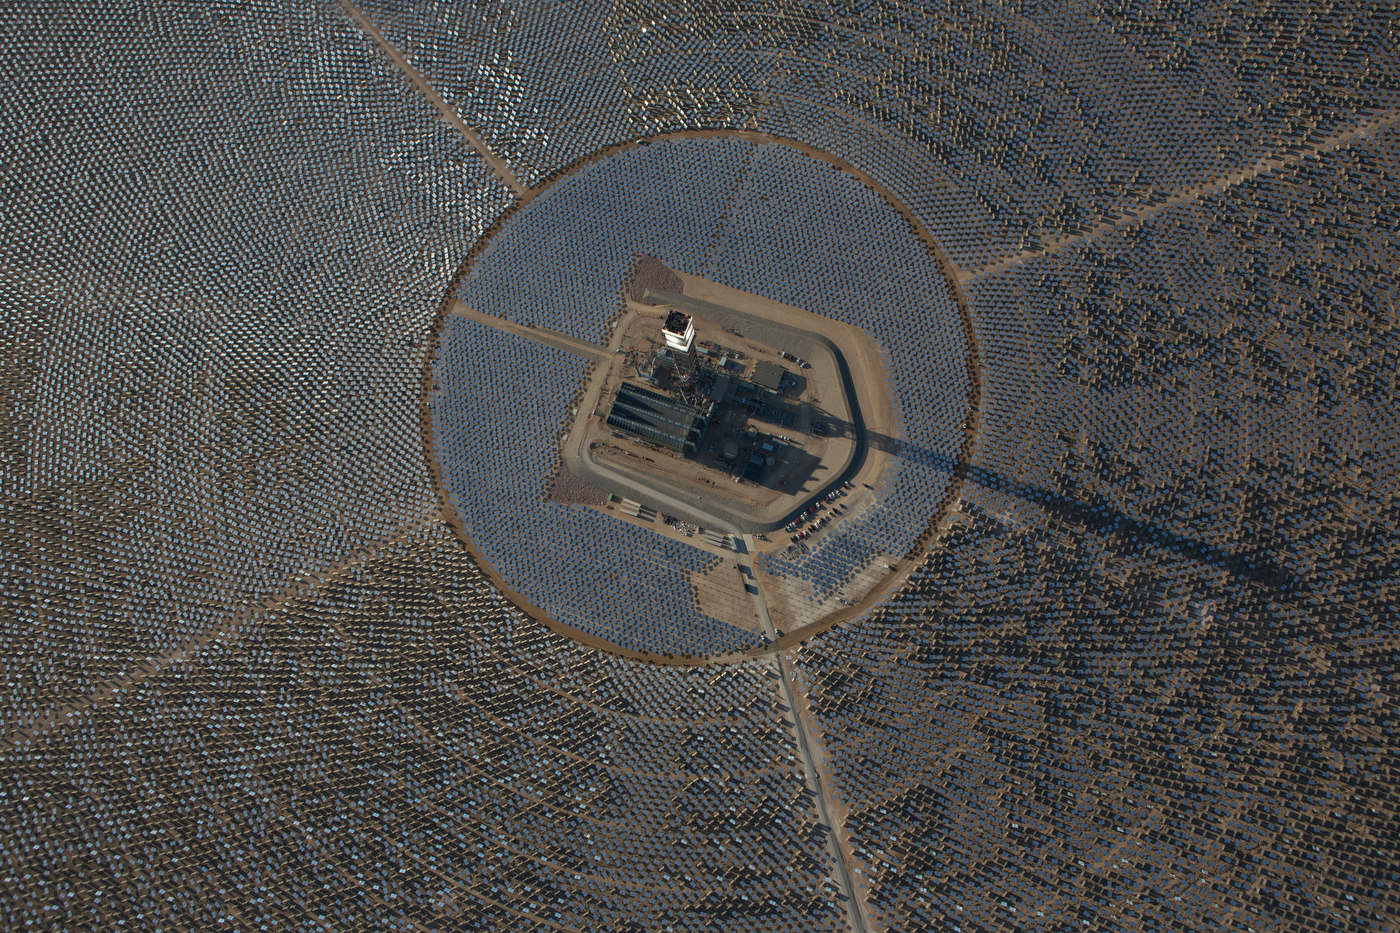 Aerial view of Ivanpah's Tower 1 during during testing.